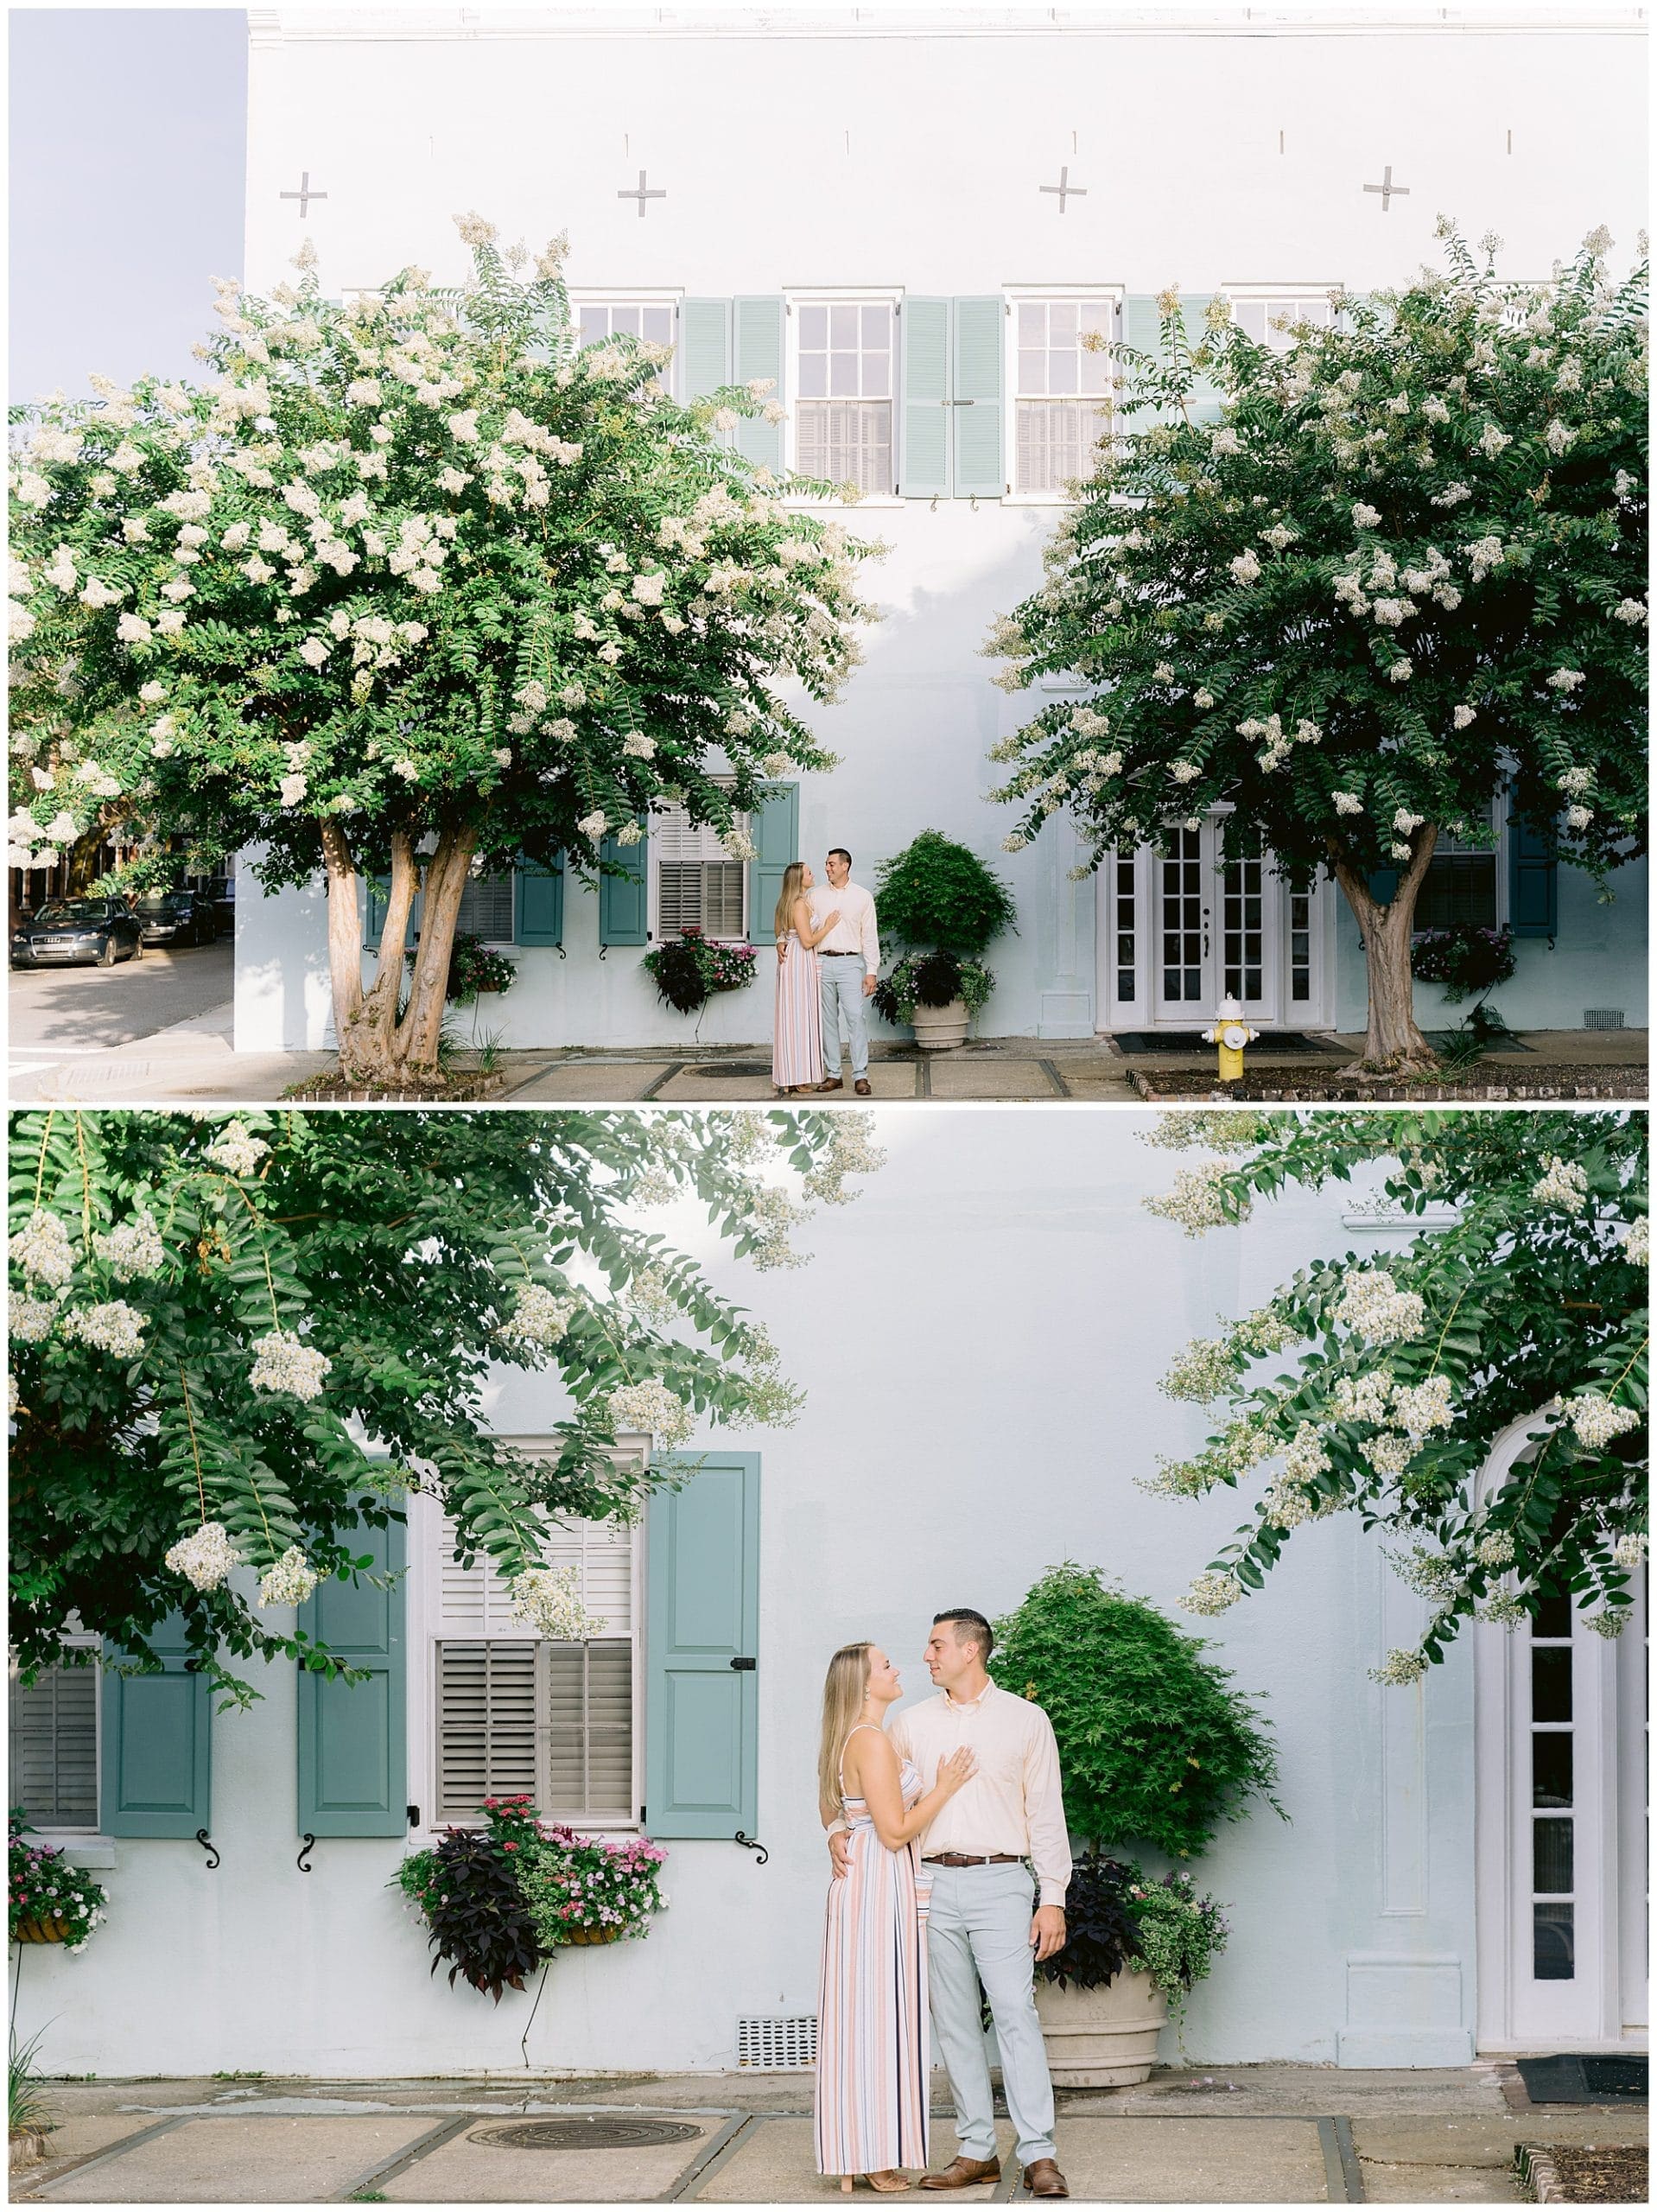 Engagement pictures in front of colorful home in Charleston, South Carolina taken by Kathy Beaver Photography, a Charleston wedding photographer.